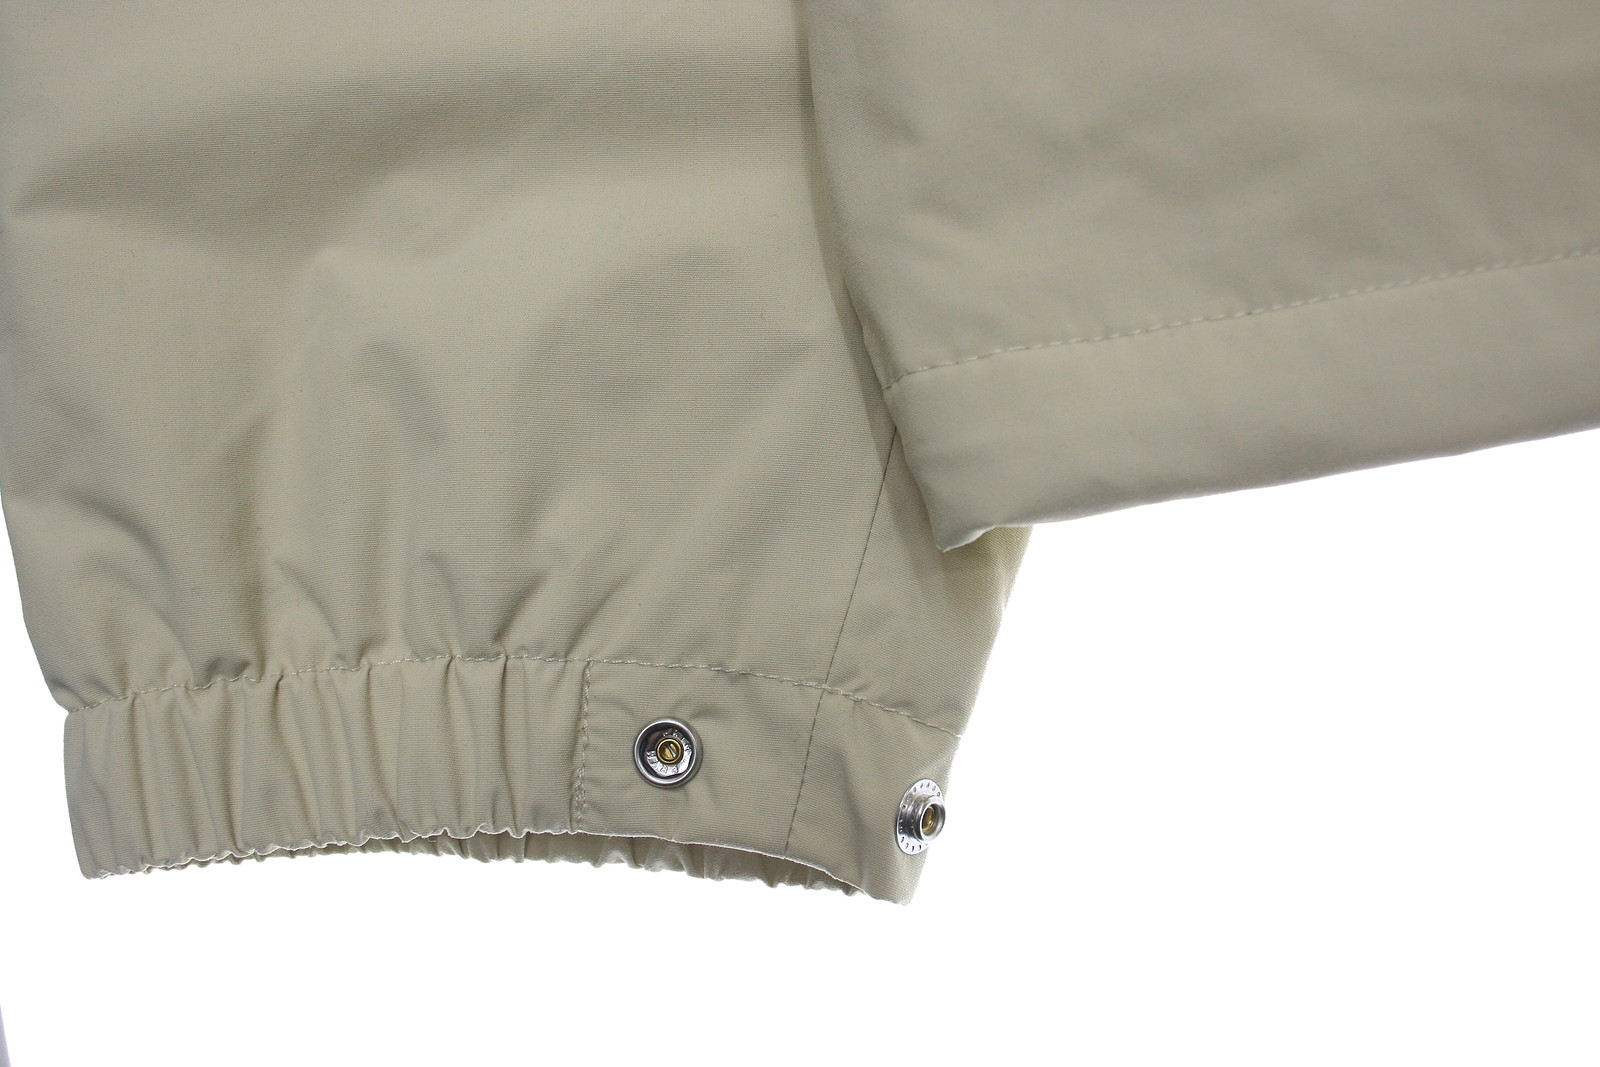 The North Face DryVent Men's Gravel/Military Olive M66 Utility Rain Jacket $199